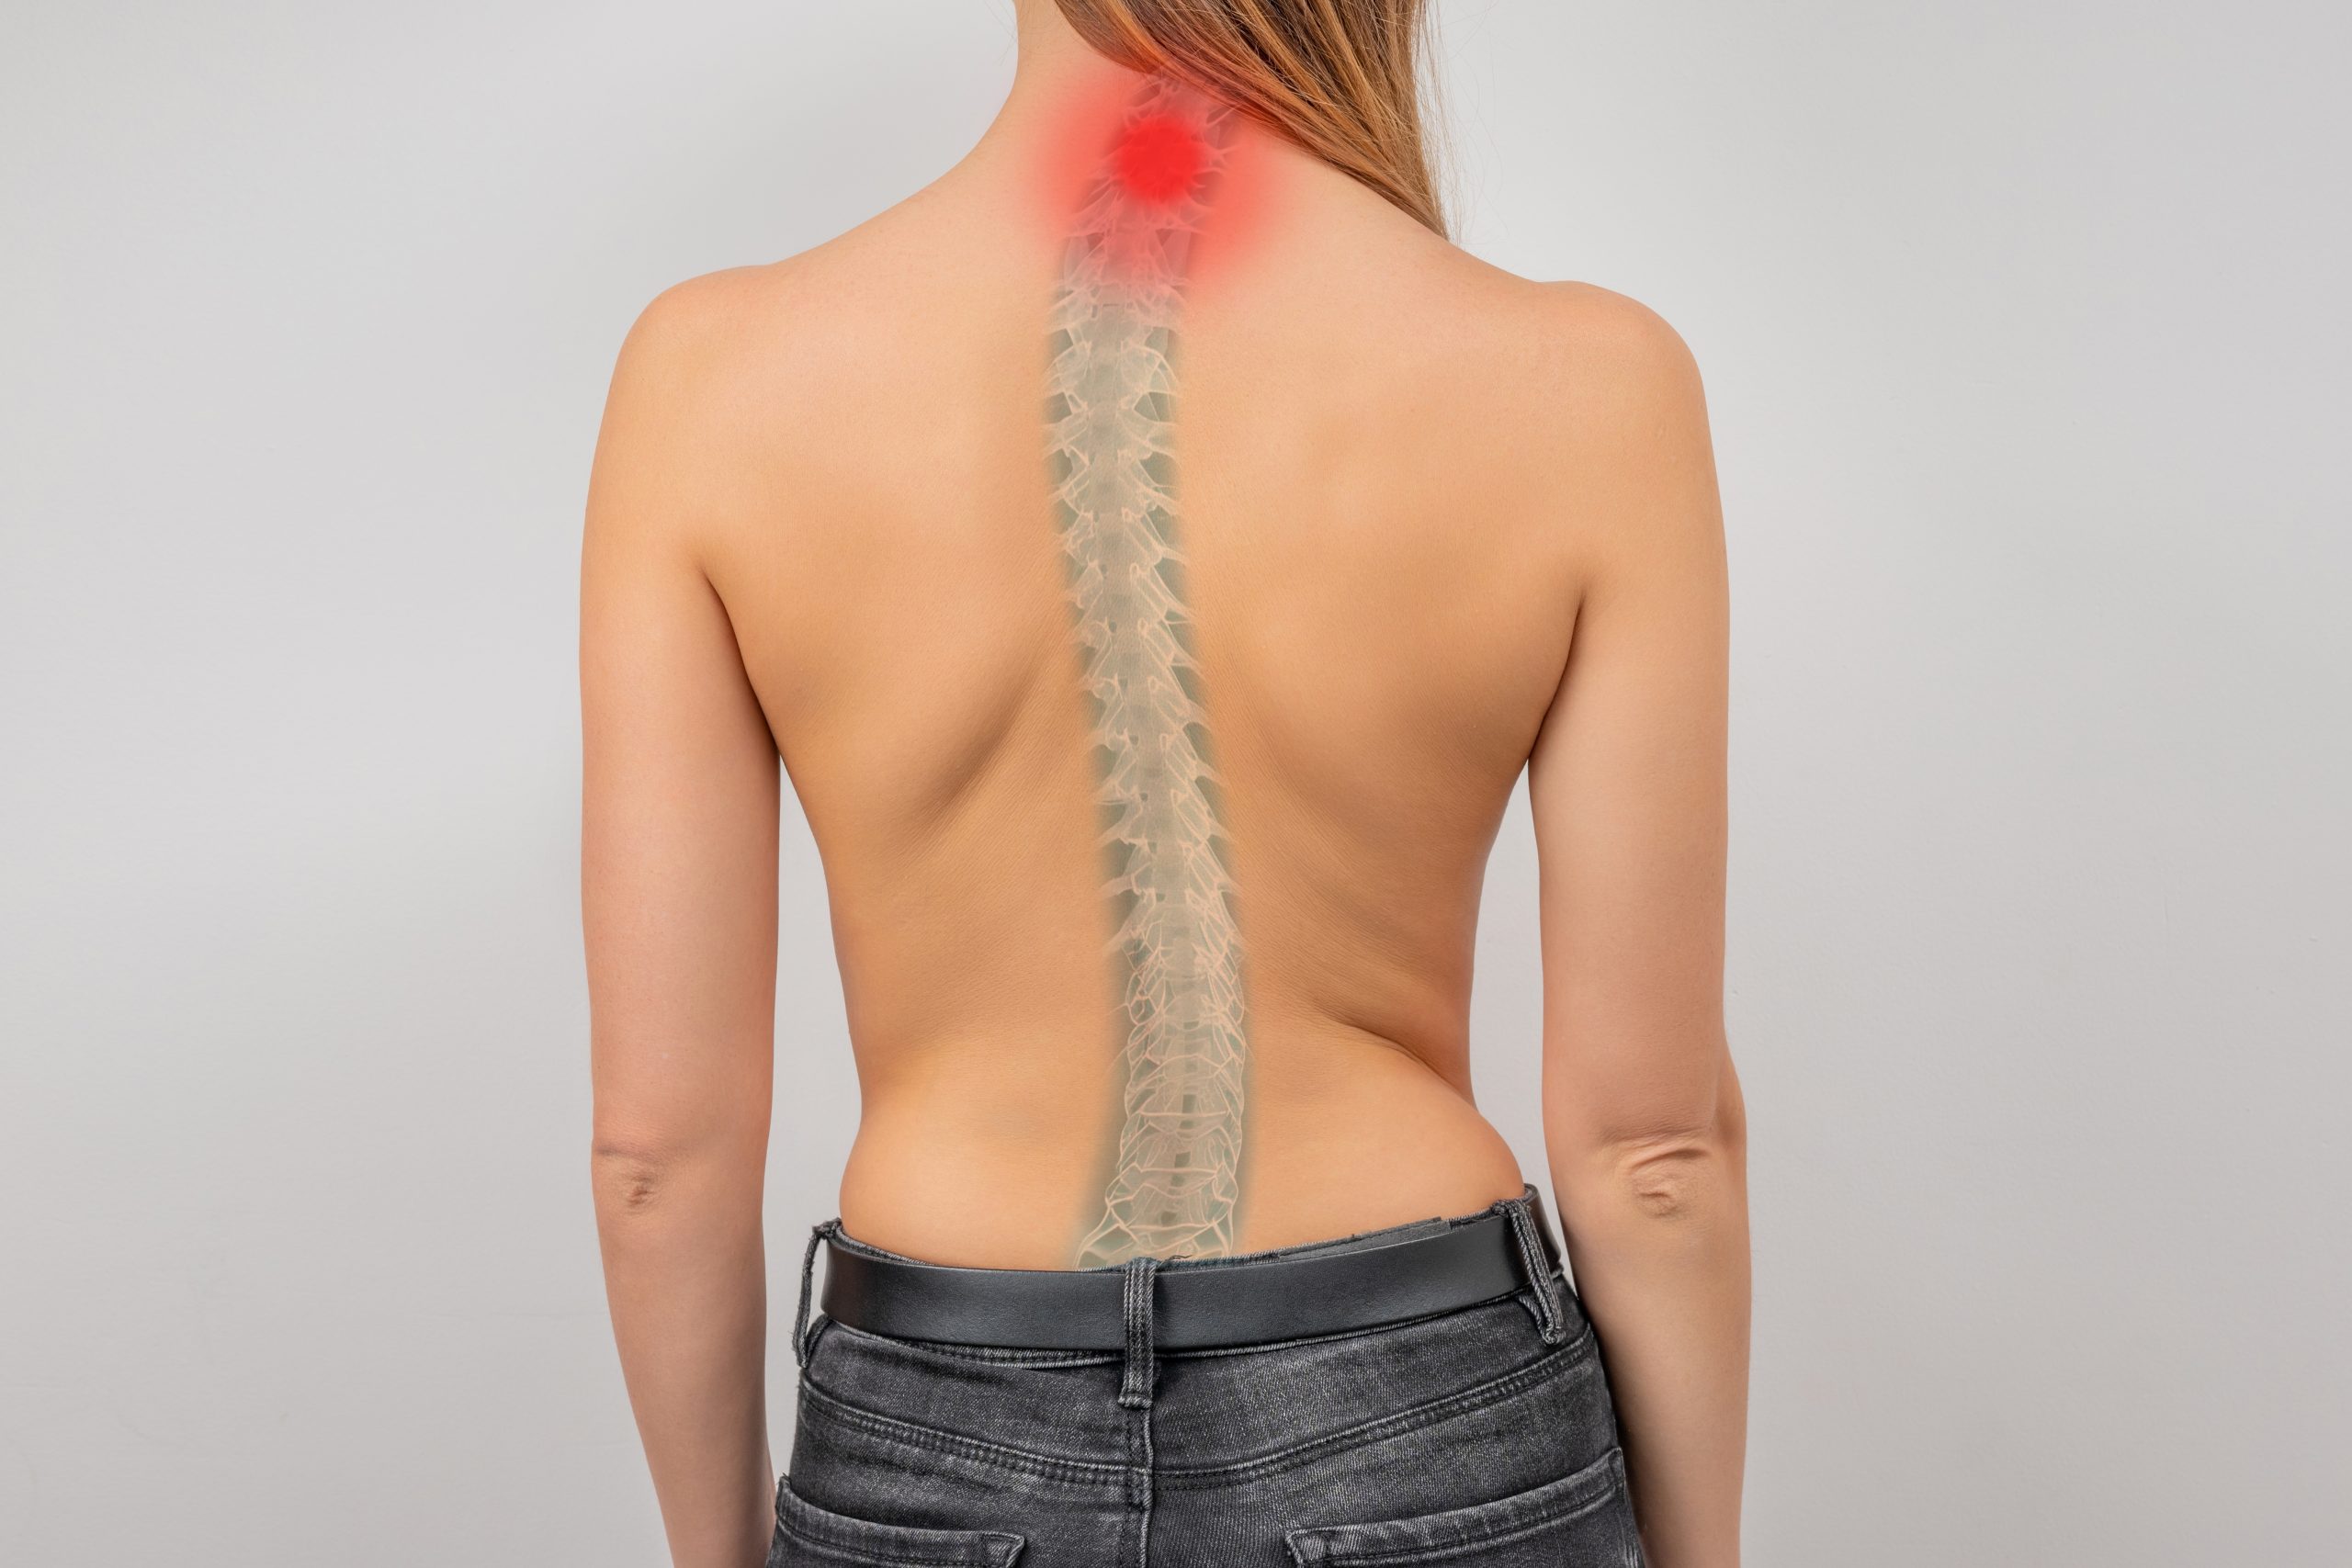 Cervical Lordosis Chiropractic Treatment Near Lynnwood, WA